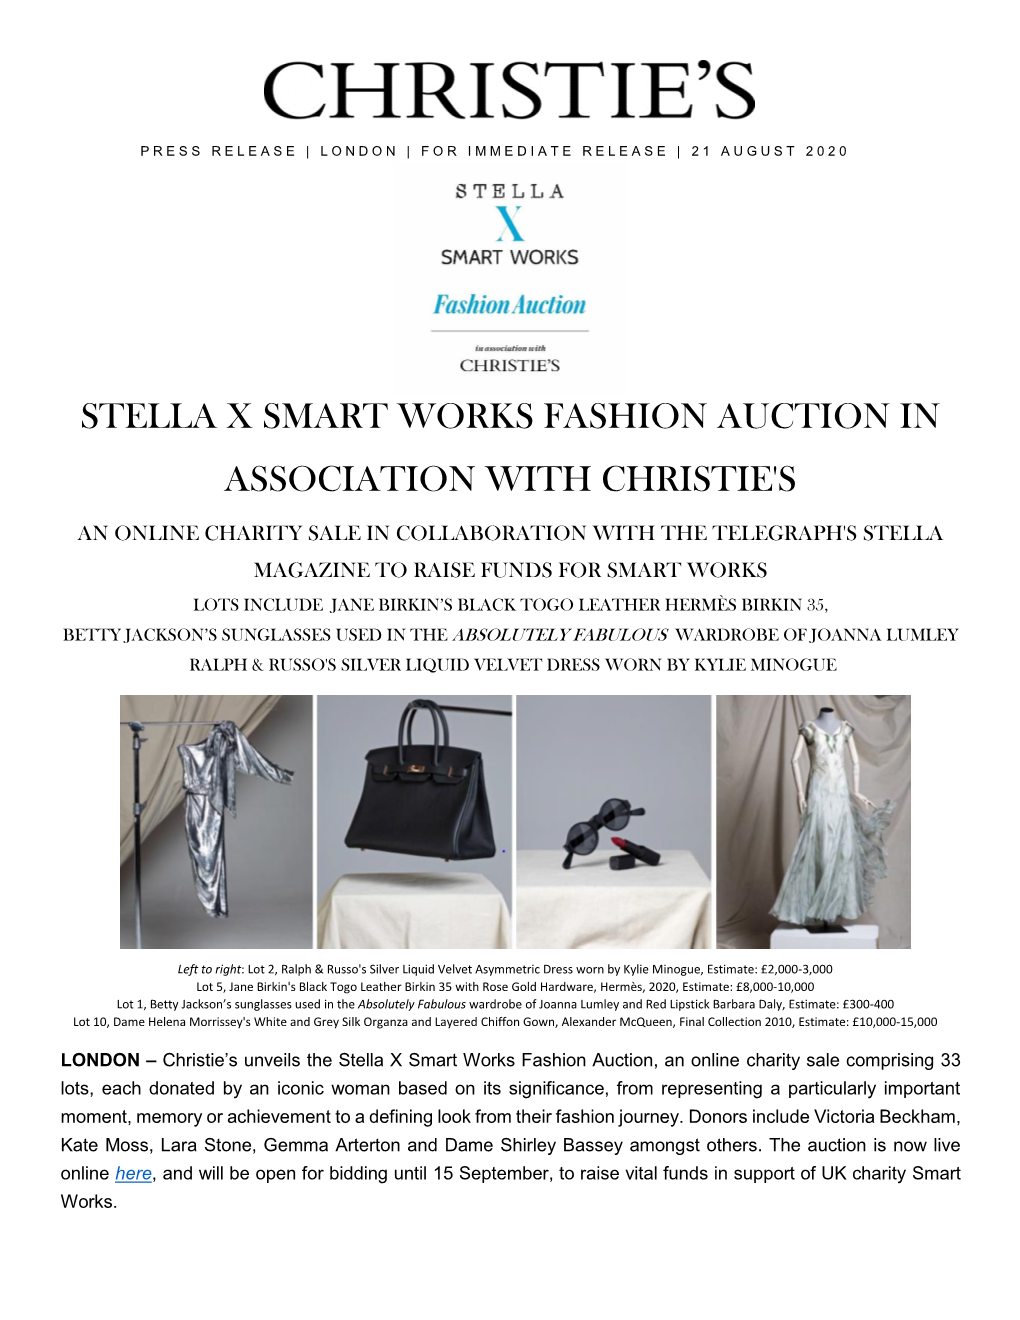 Stella X Smart Works Fashion Auction in Association with Christie's